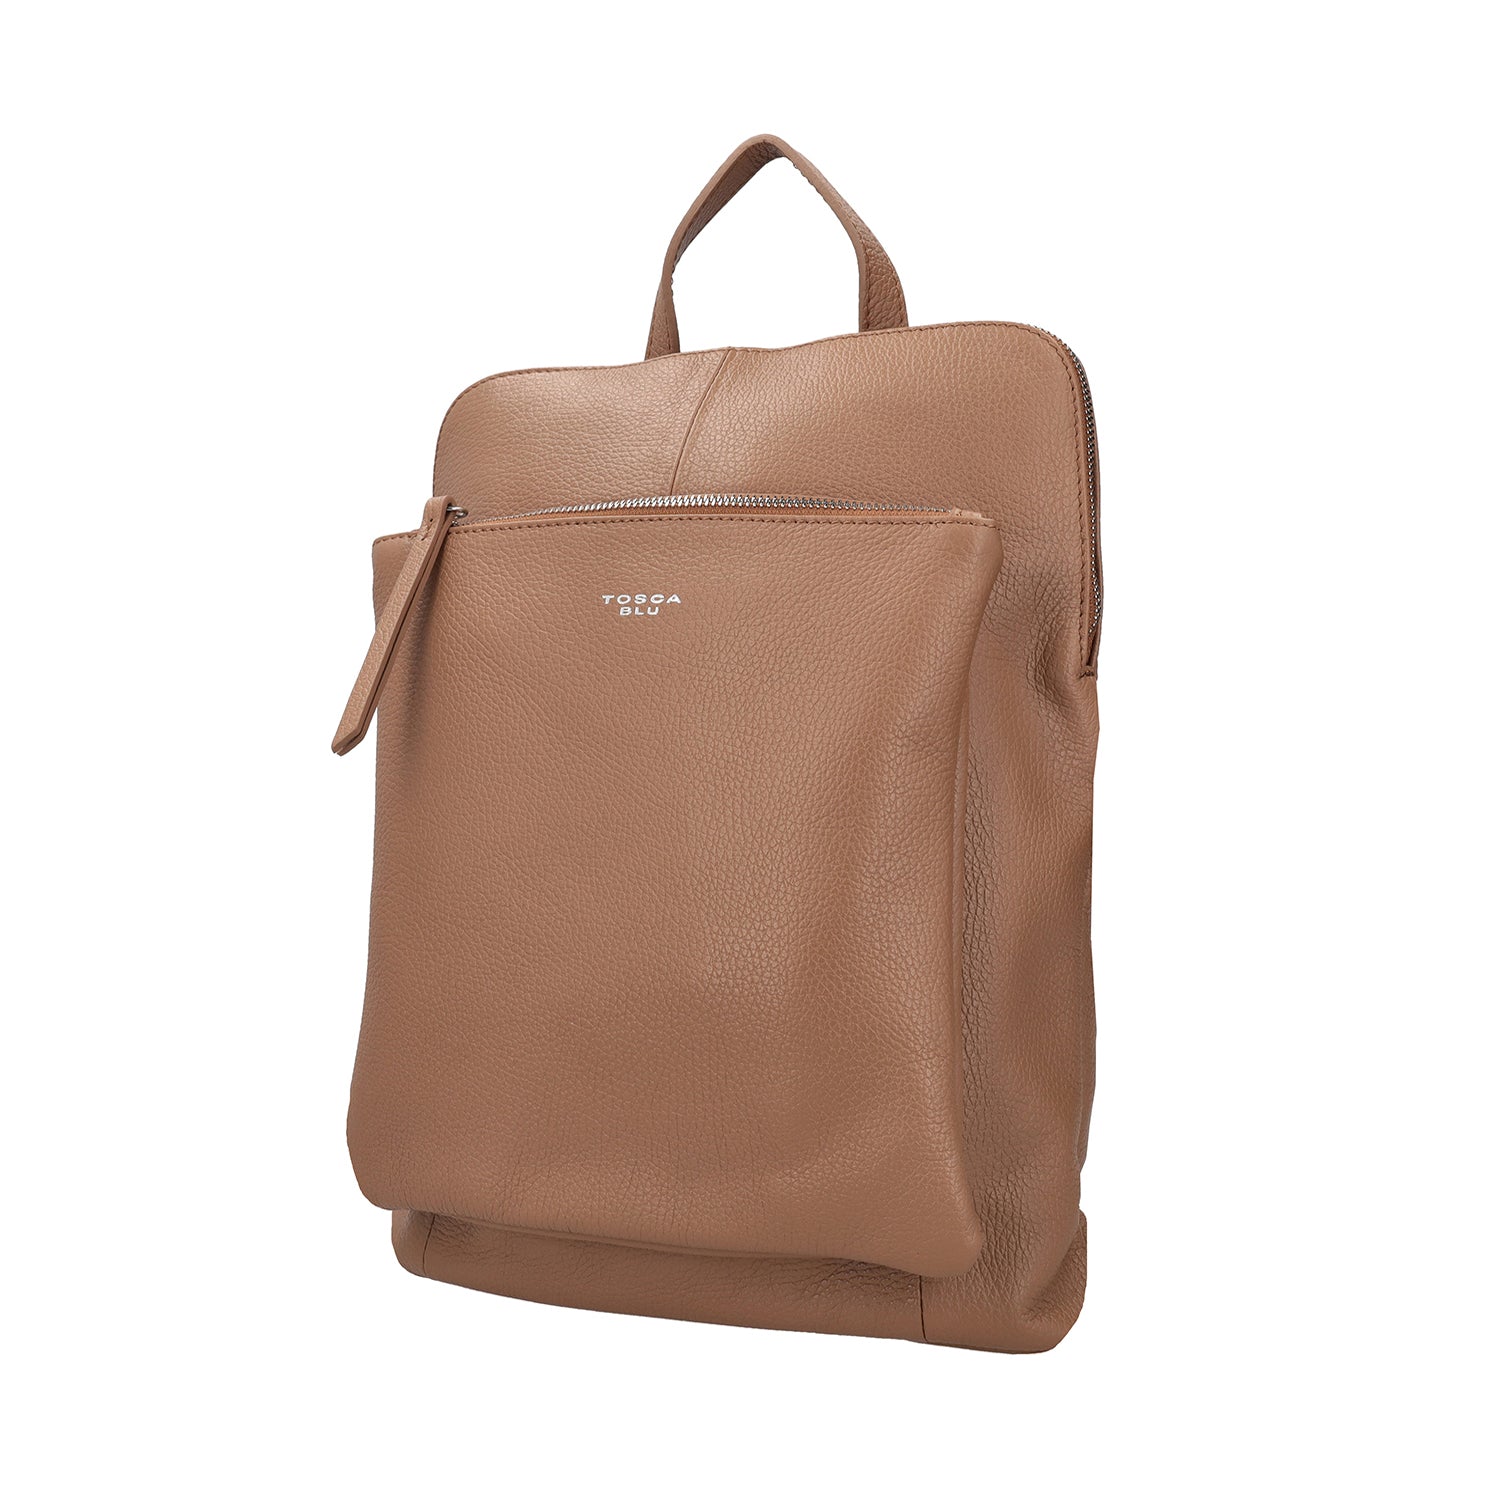 BEIGE LEATHER BACKPACK WITH ZIPPER CLOSURE